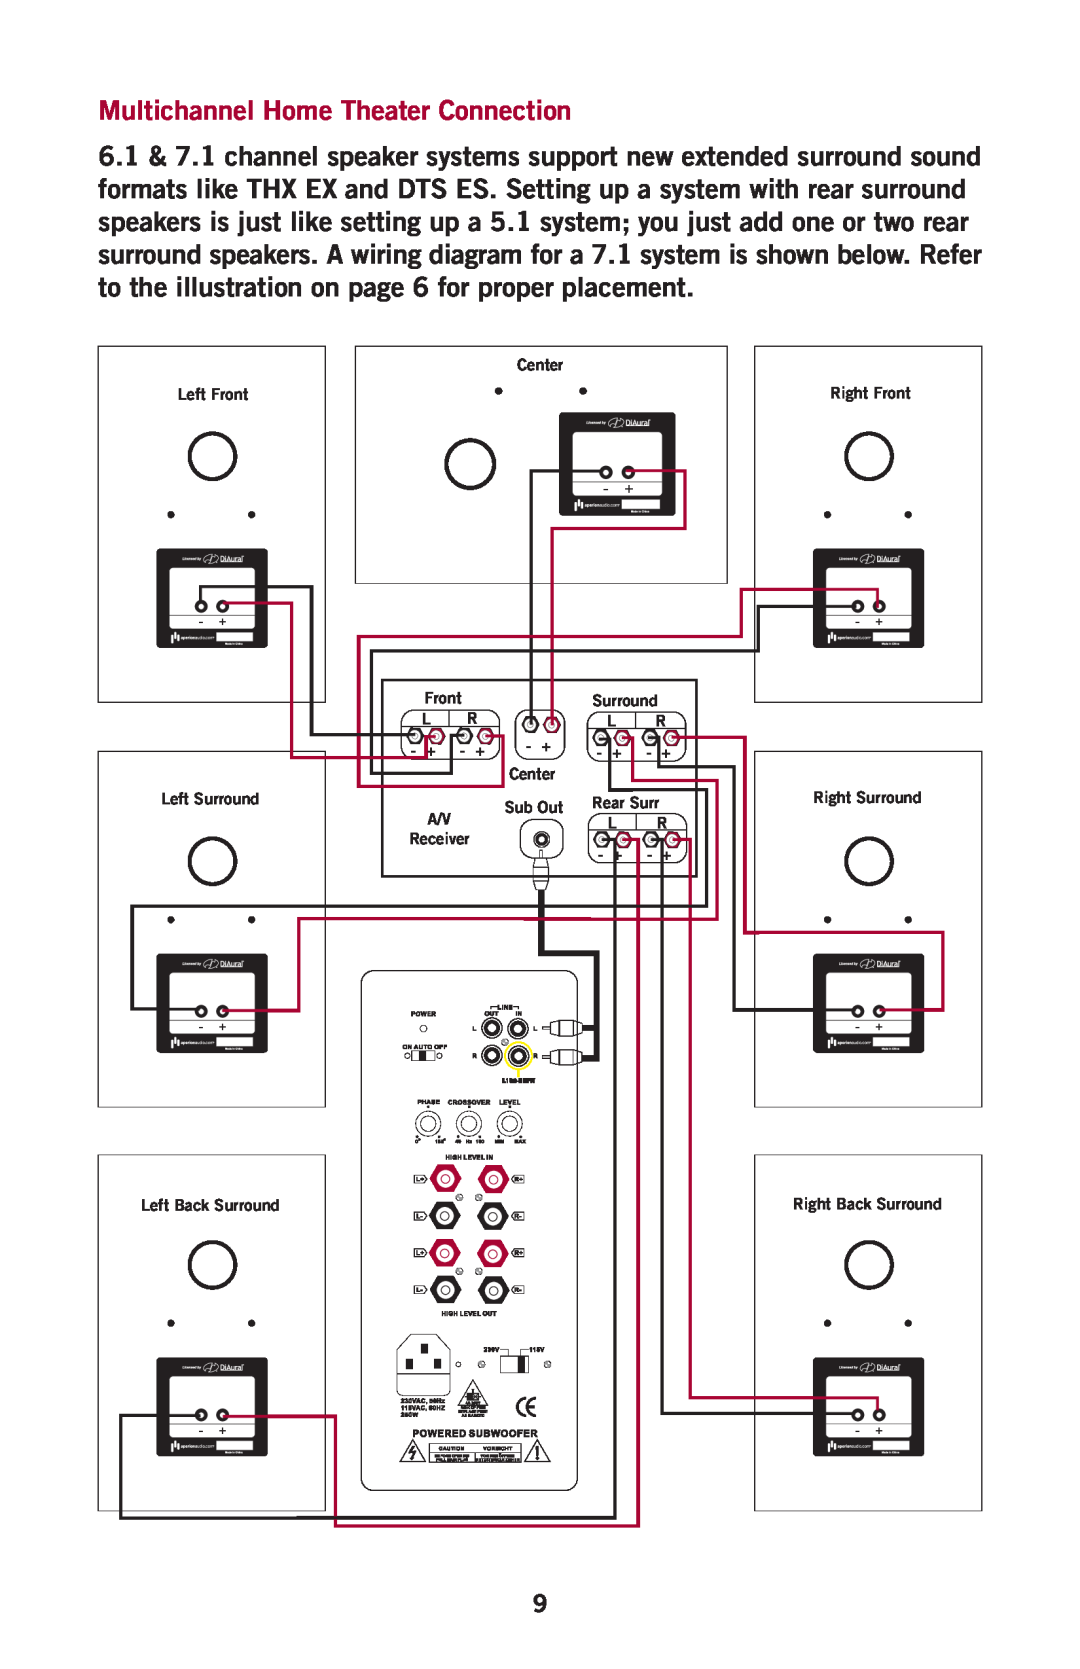 Aperion Audio Intimus Series owner manual Multichannel Home Theater Connection 